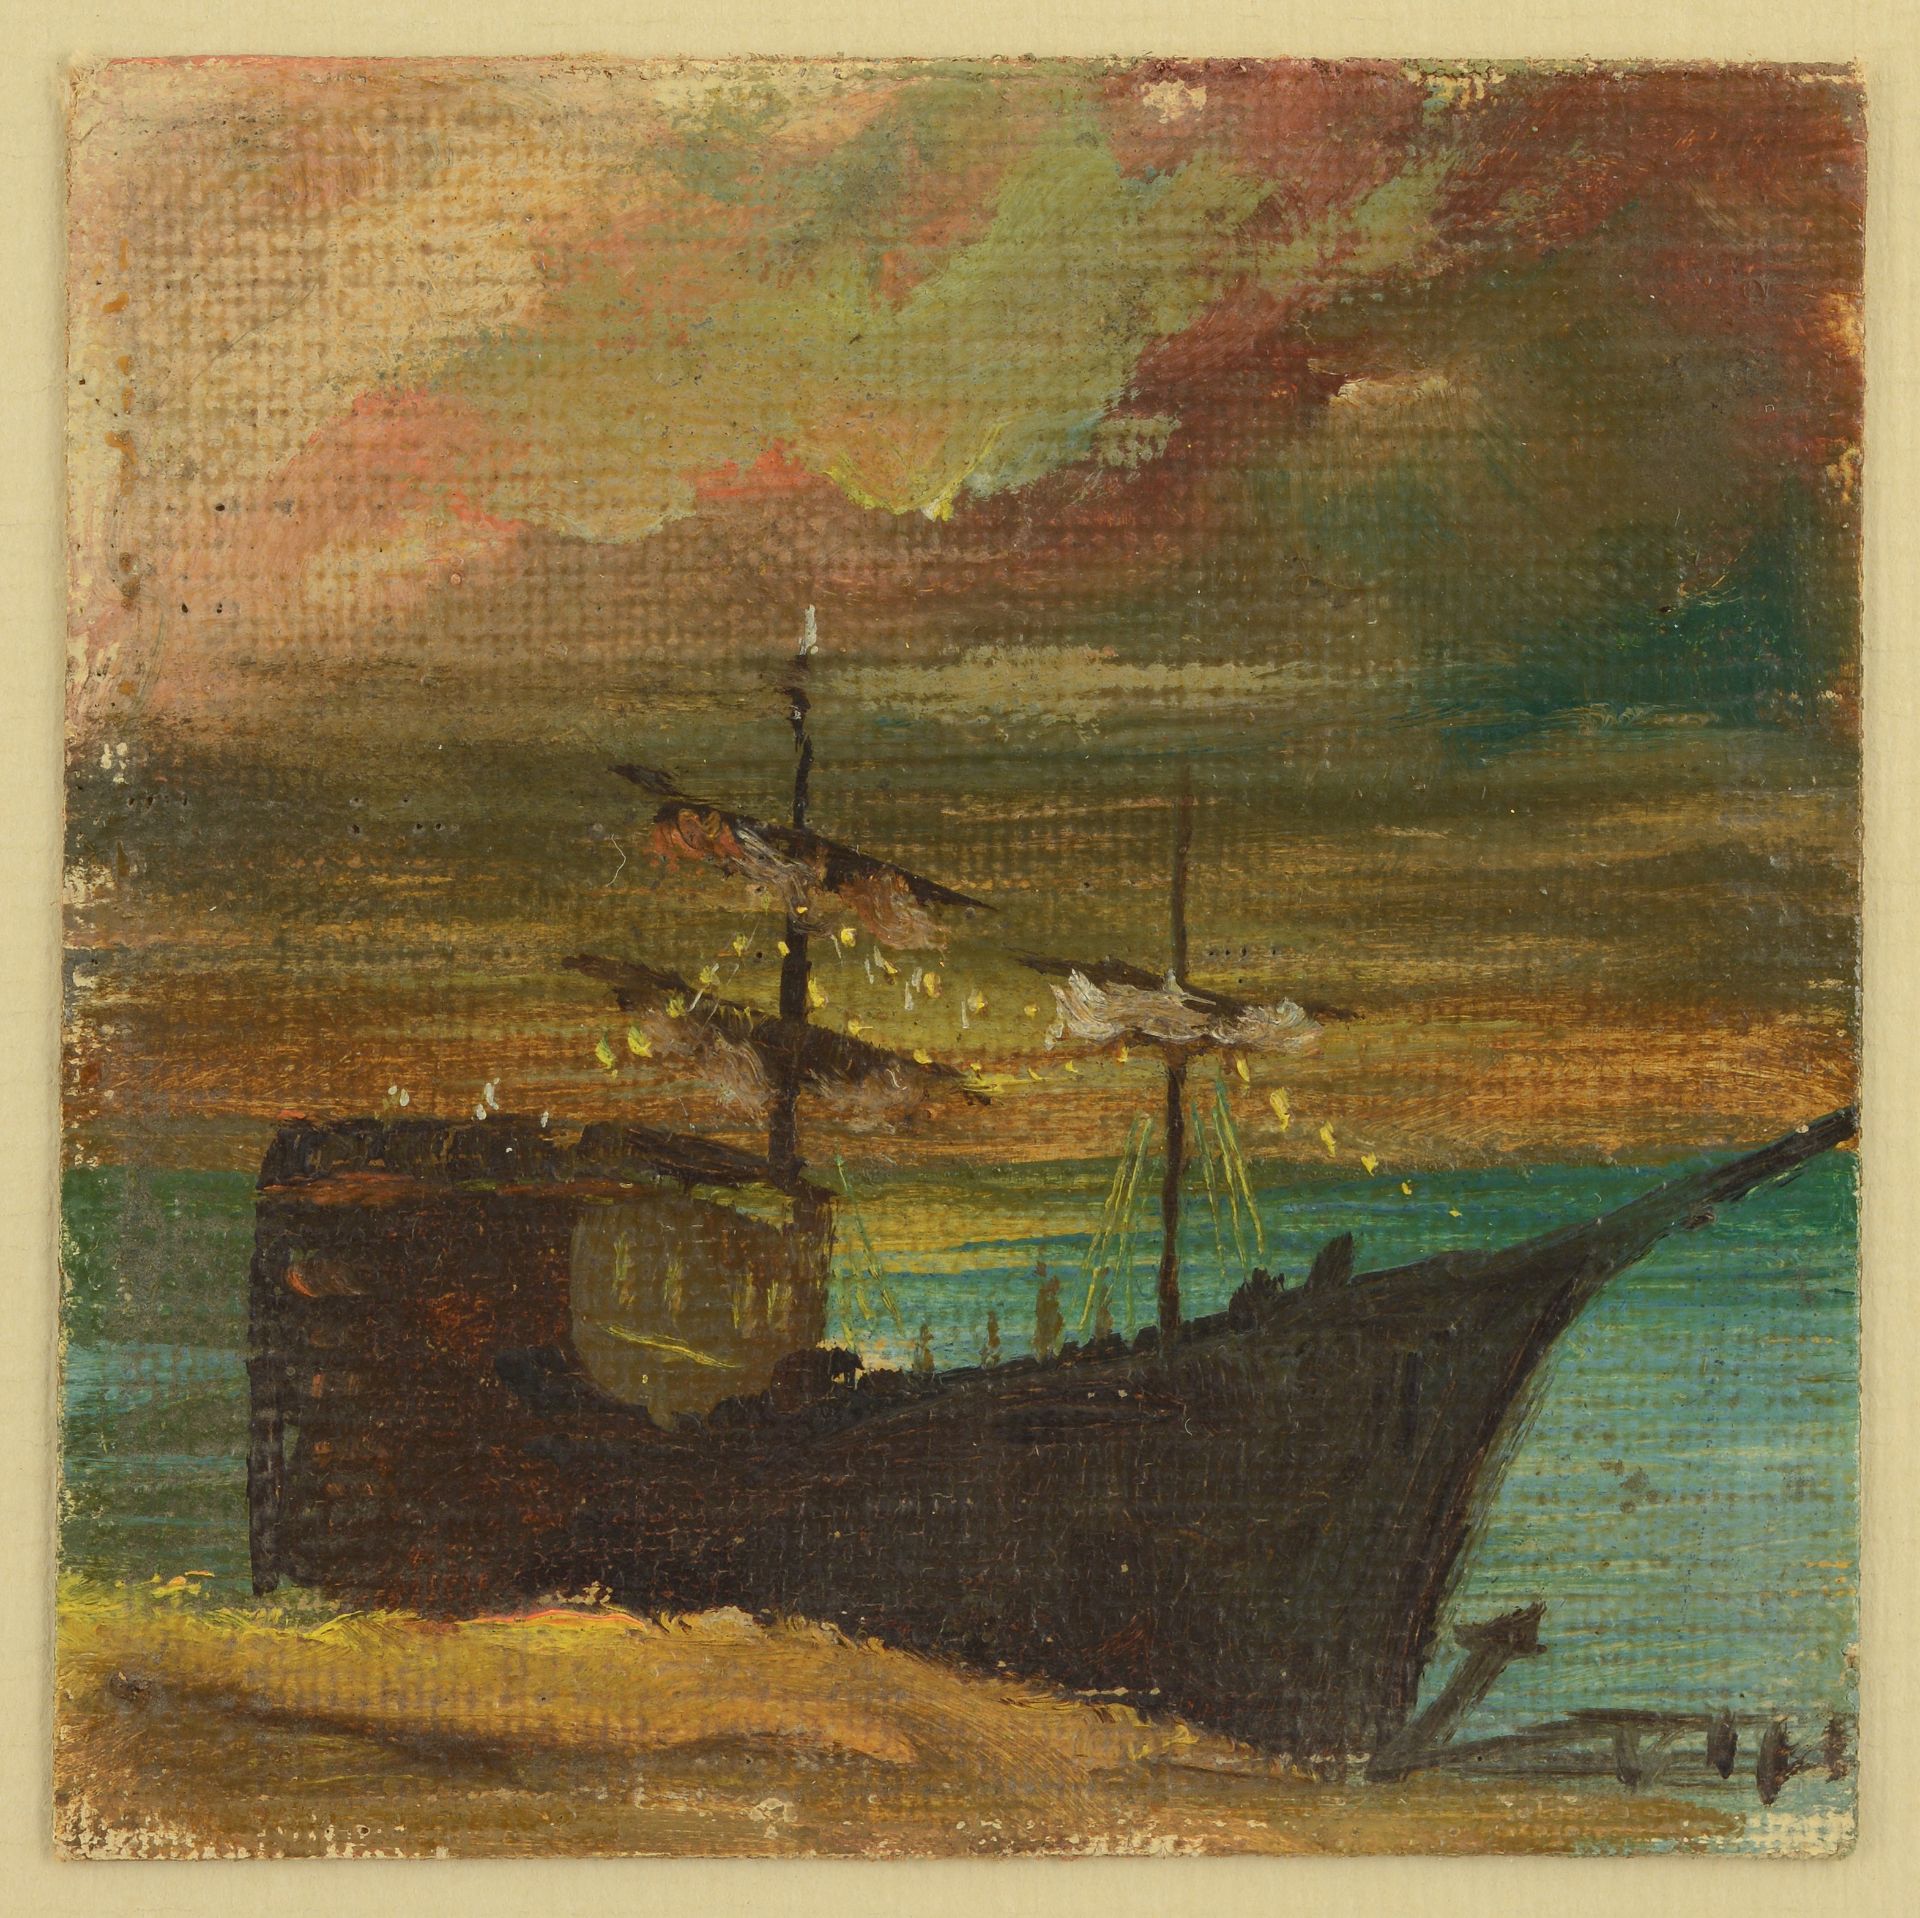 UNKNOWN AUTHOR
„Ship on the shore“